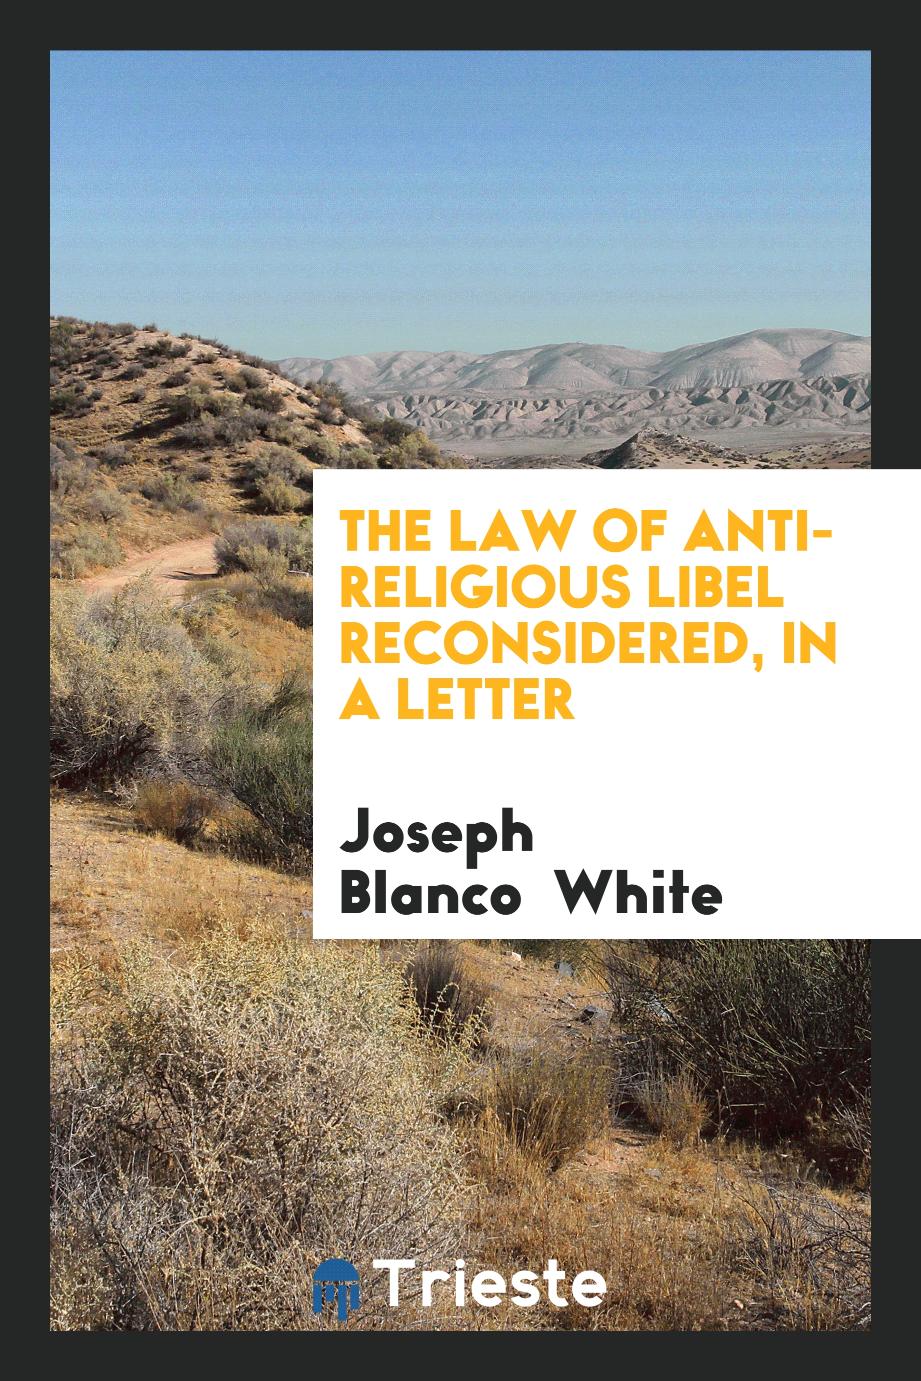 The Law of Anti-Religious Libel Reconsidered, in a Letter